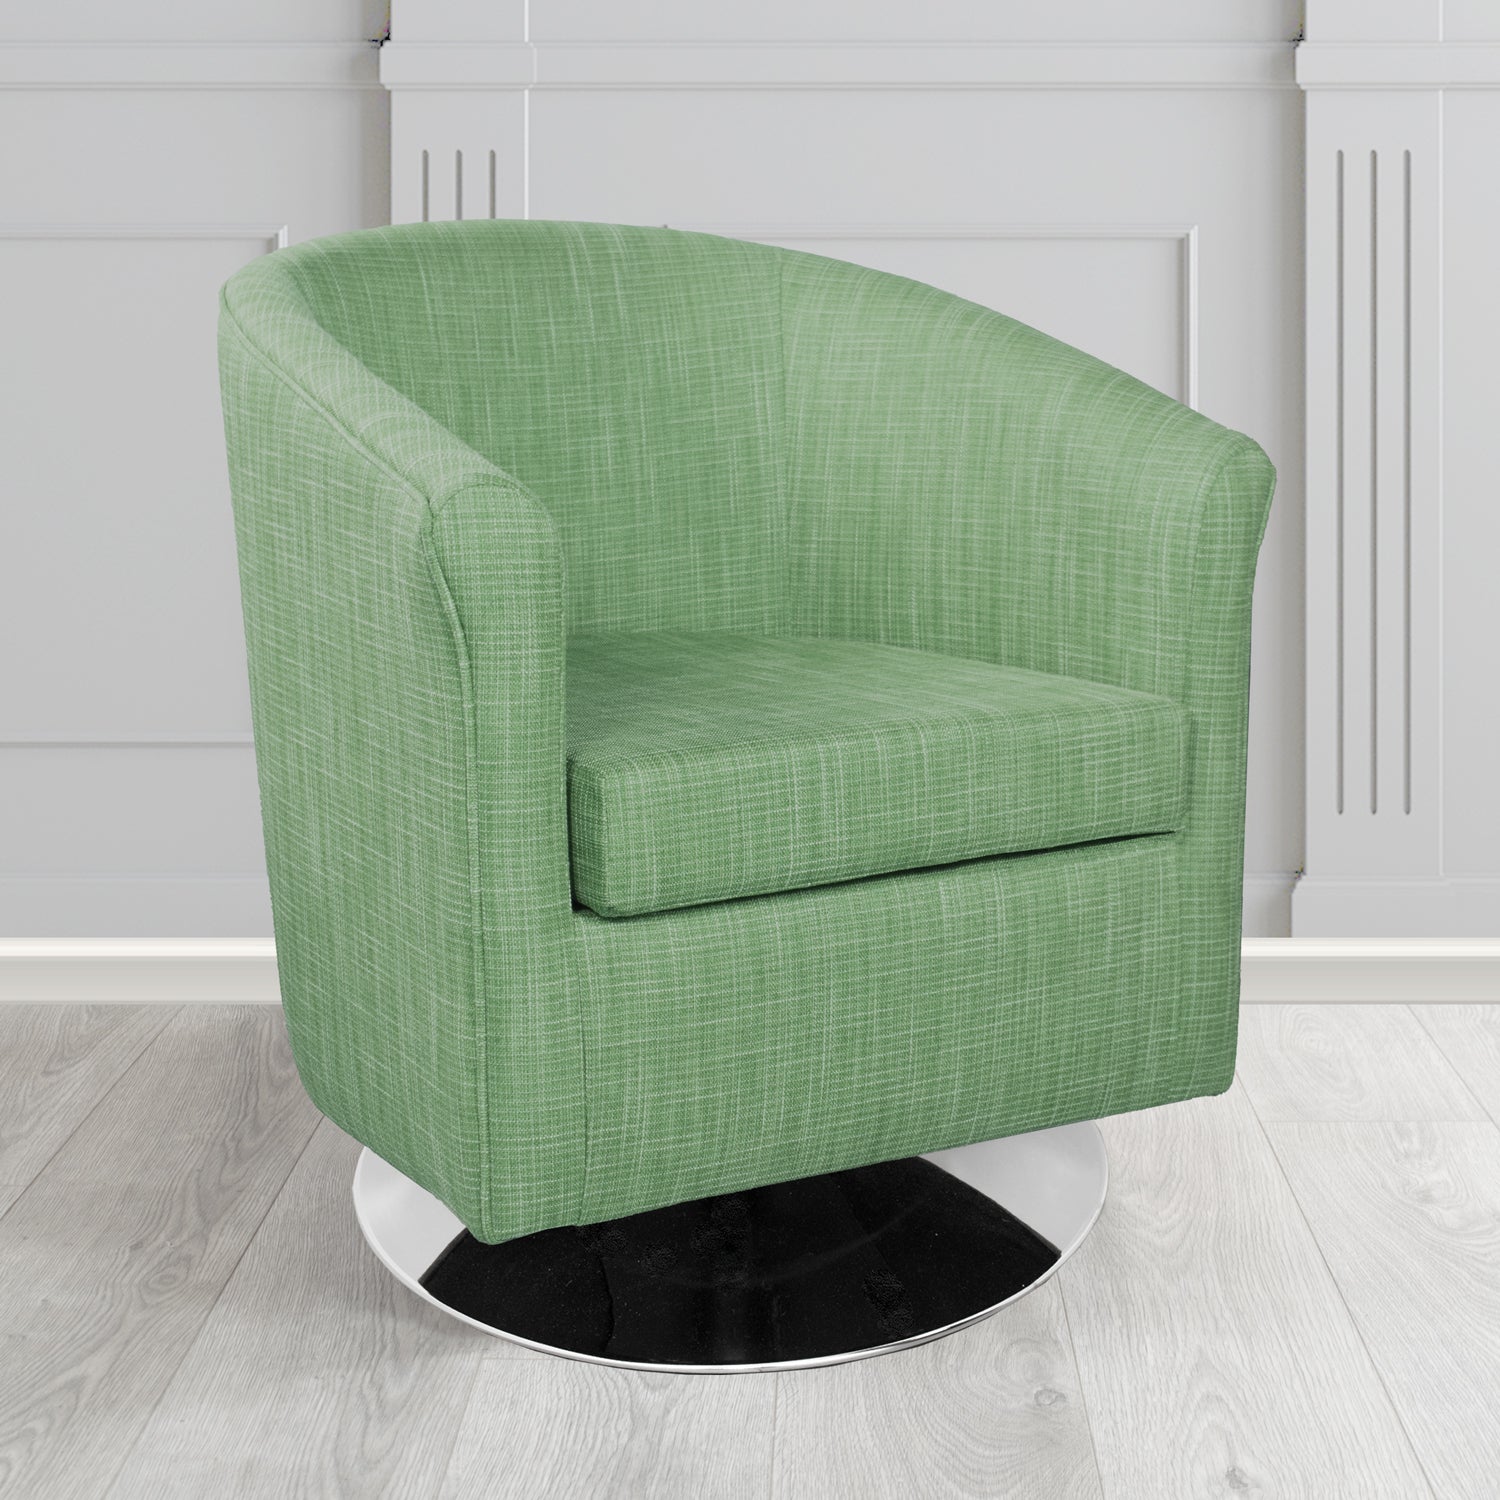 Tuscany Ravel Aspen Contract Crib 5 Fabric Swivel Tub Chair - Antimicrobial & Water-Resistant - The Tub Chair Shop